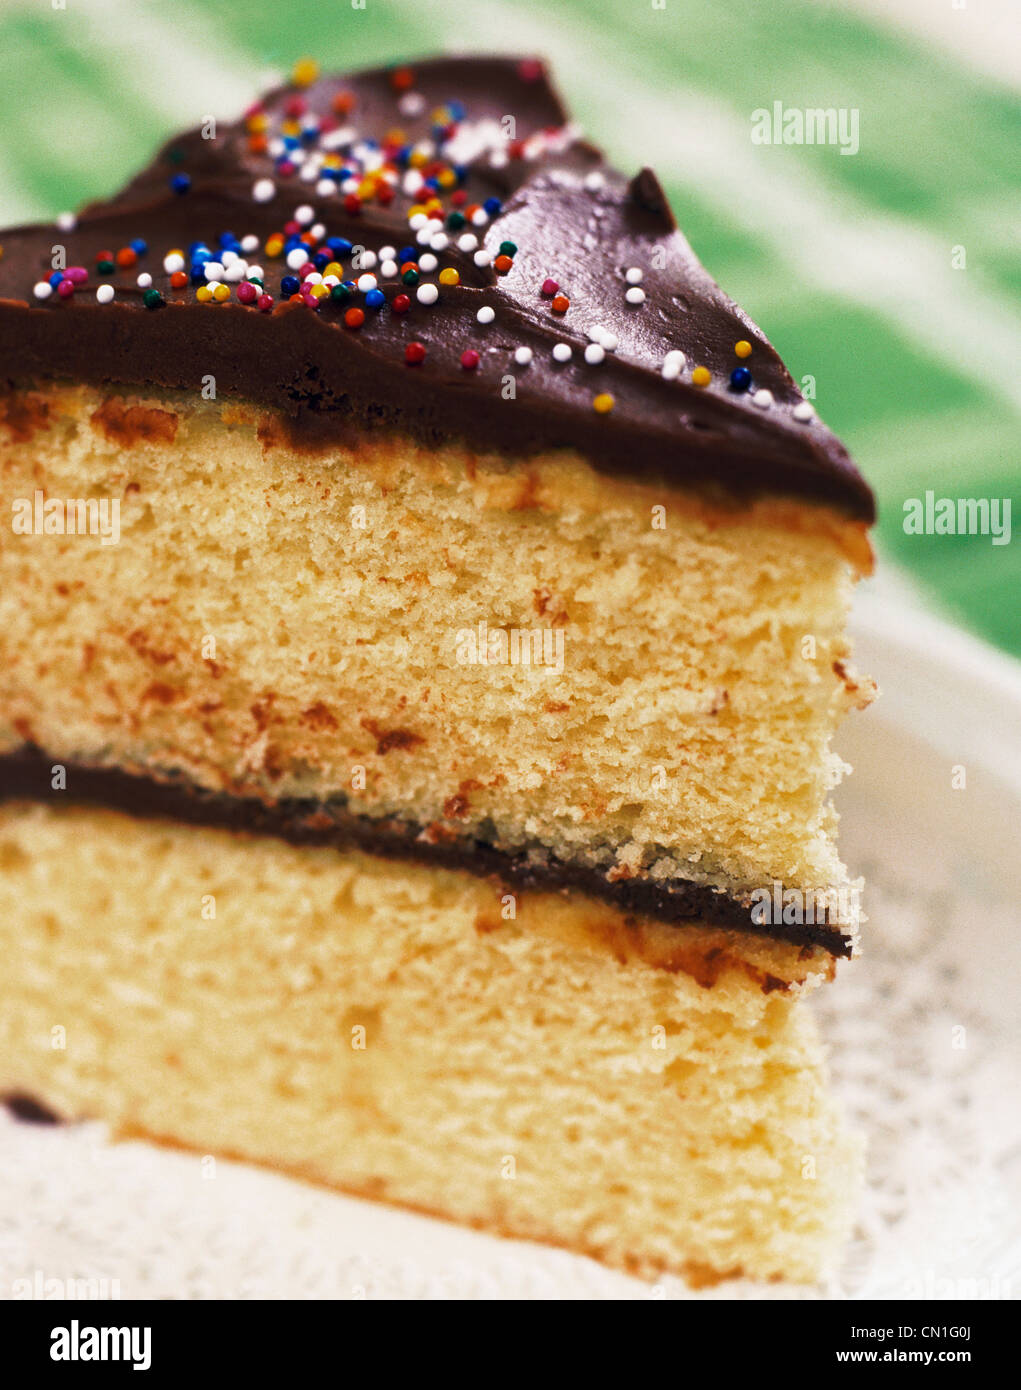 Layer Cake with Chocolate Frosting Stock Photo